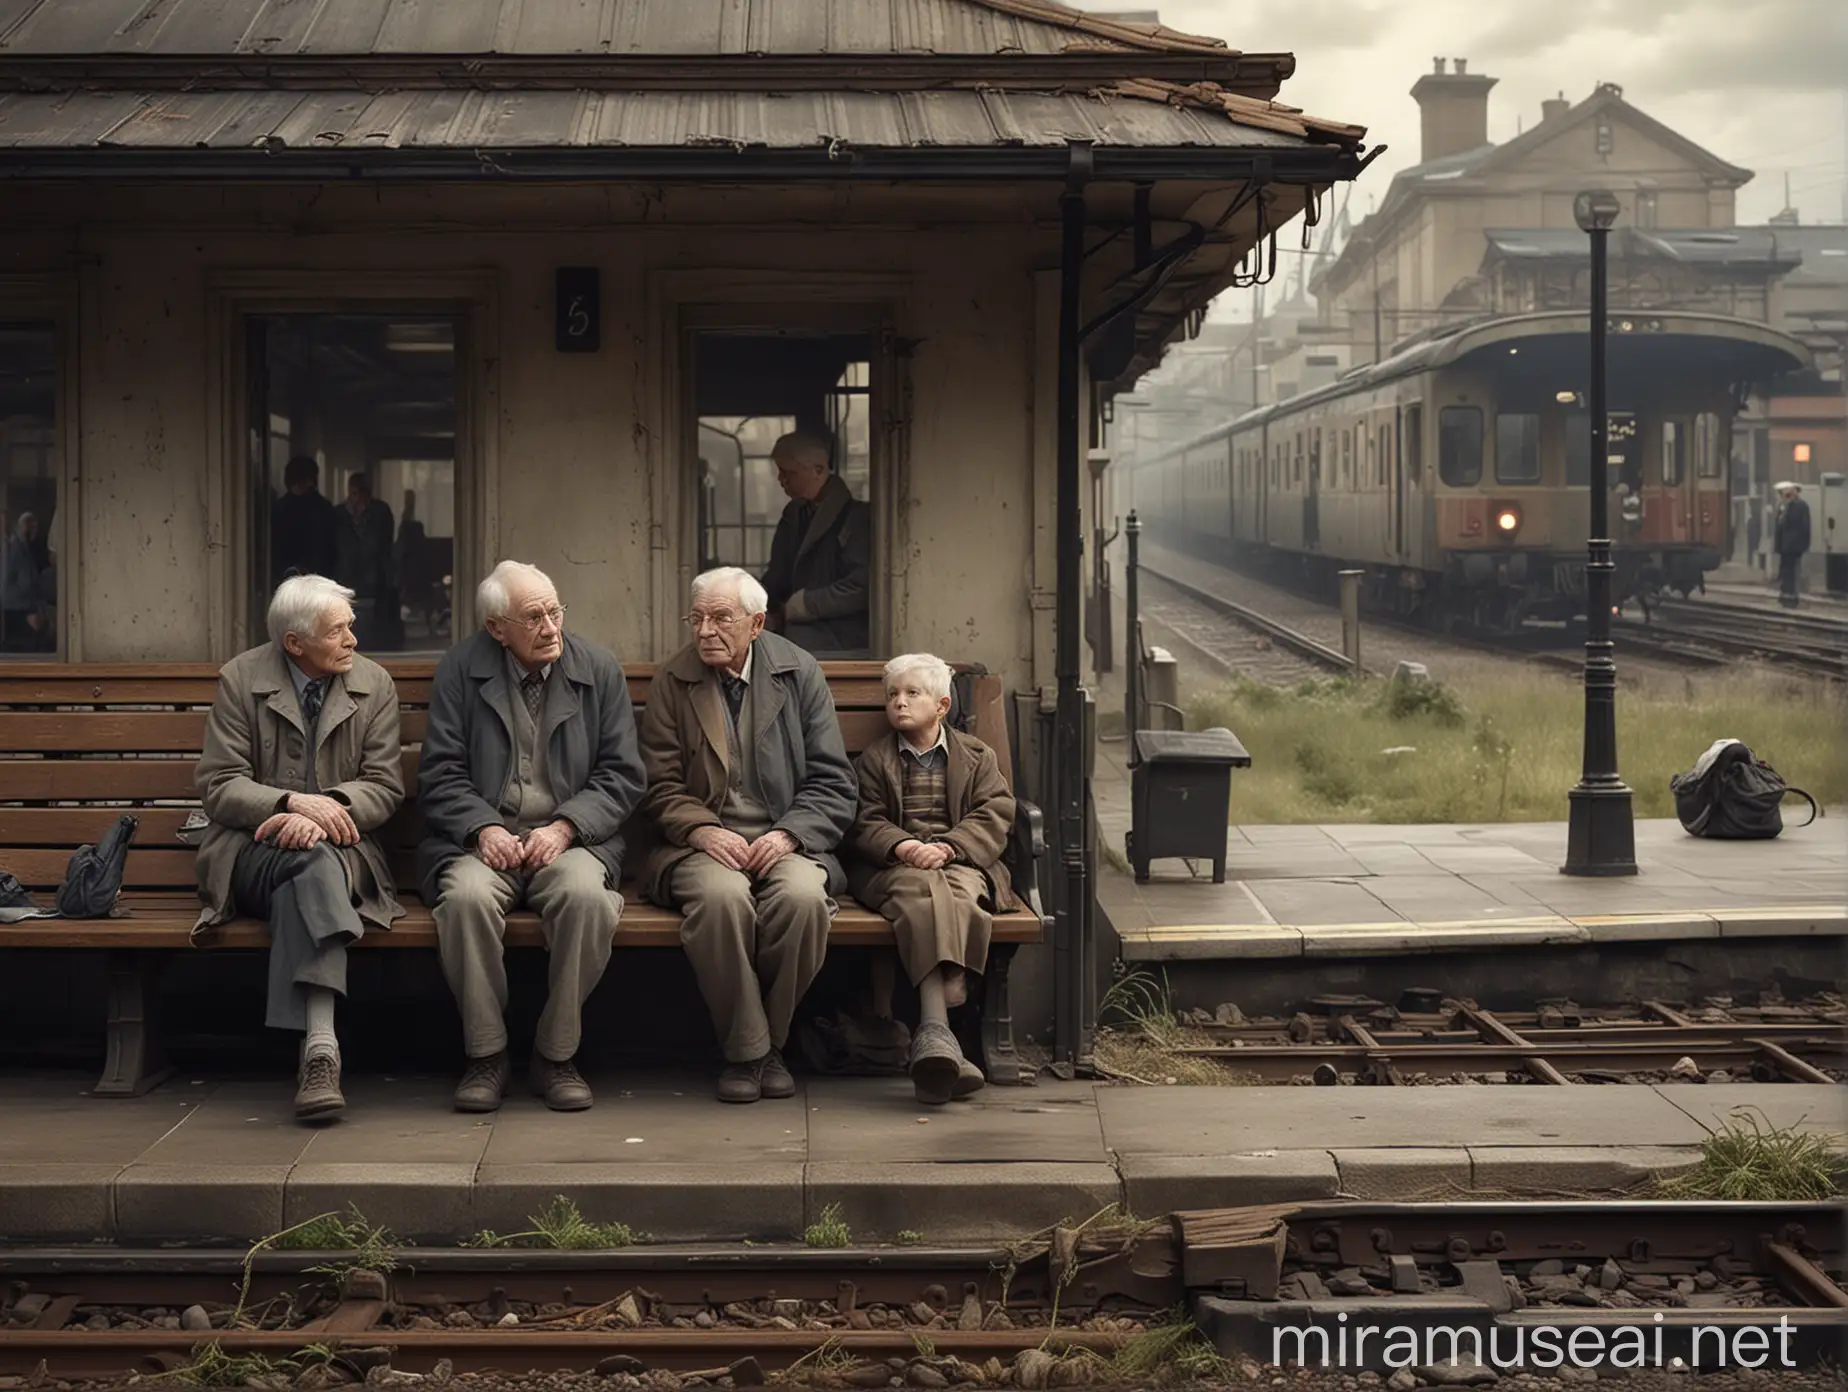 an image created in a realistic photographic style depicting the same person at three different stages of life: as a boy, as an adult, and as an elderly person. Each of the three characters is sitting on a bench along the platform of a train station. In the background, visible without any trains approaching, are the train tracks. The characters are all looking at a clock on the station wall and appear visibly tired. The framing should be wide, showing clear details of both the characters and the train station, including the aged roof, dirty windows, and worn marble floor all station whitout train., hight resolution